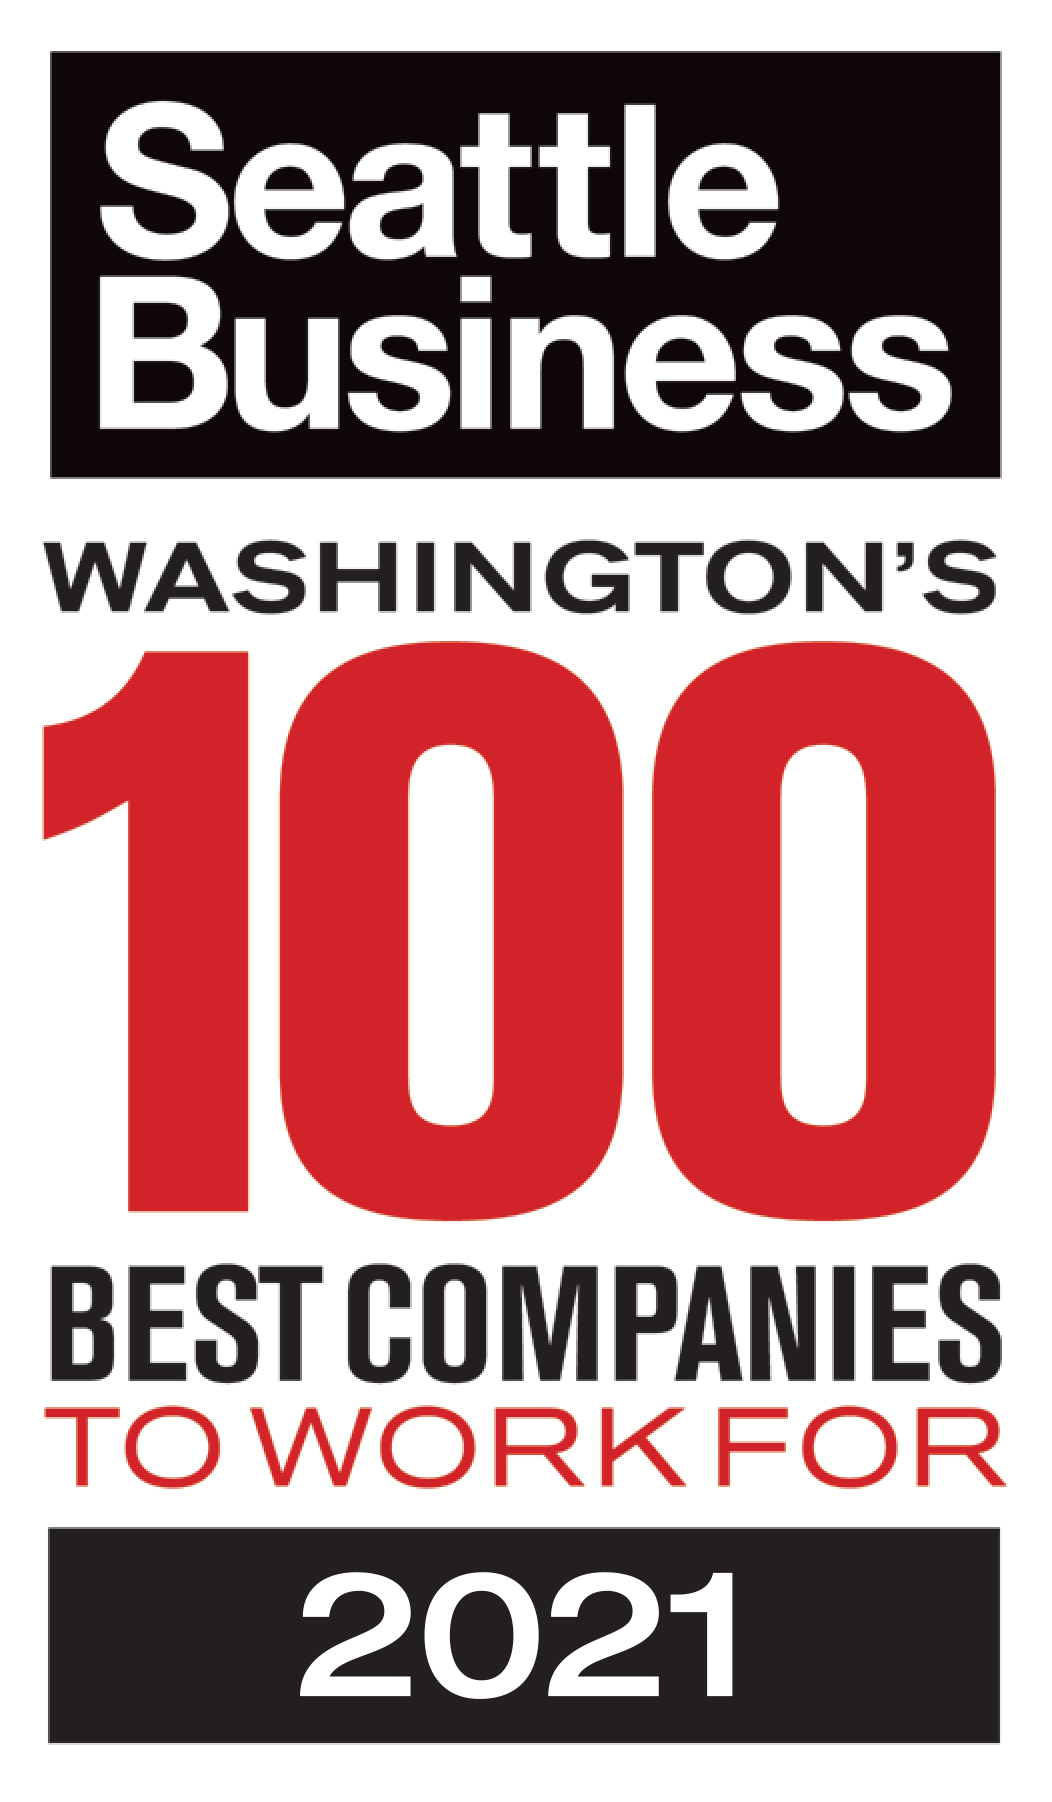 Seattle Business 100 Best companies to work for 2021